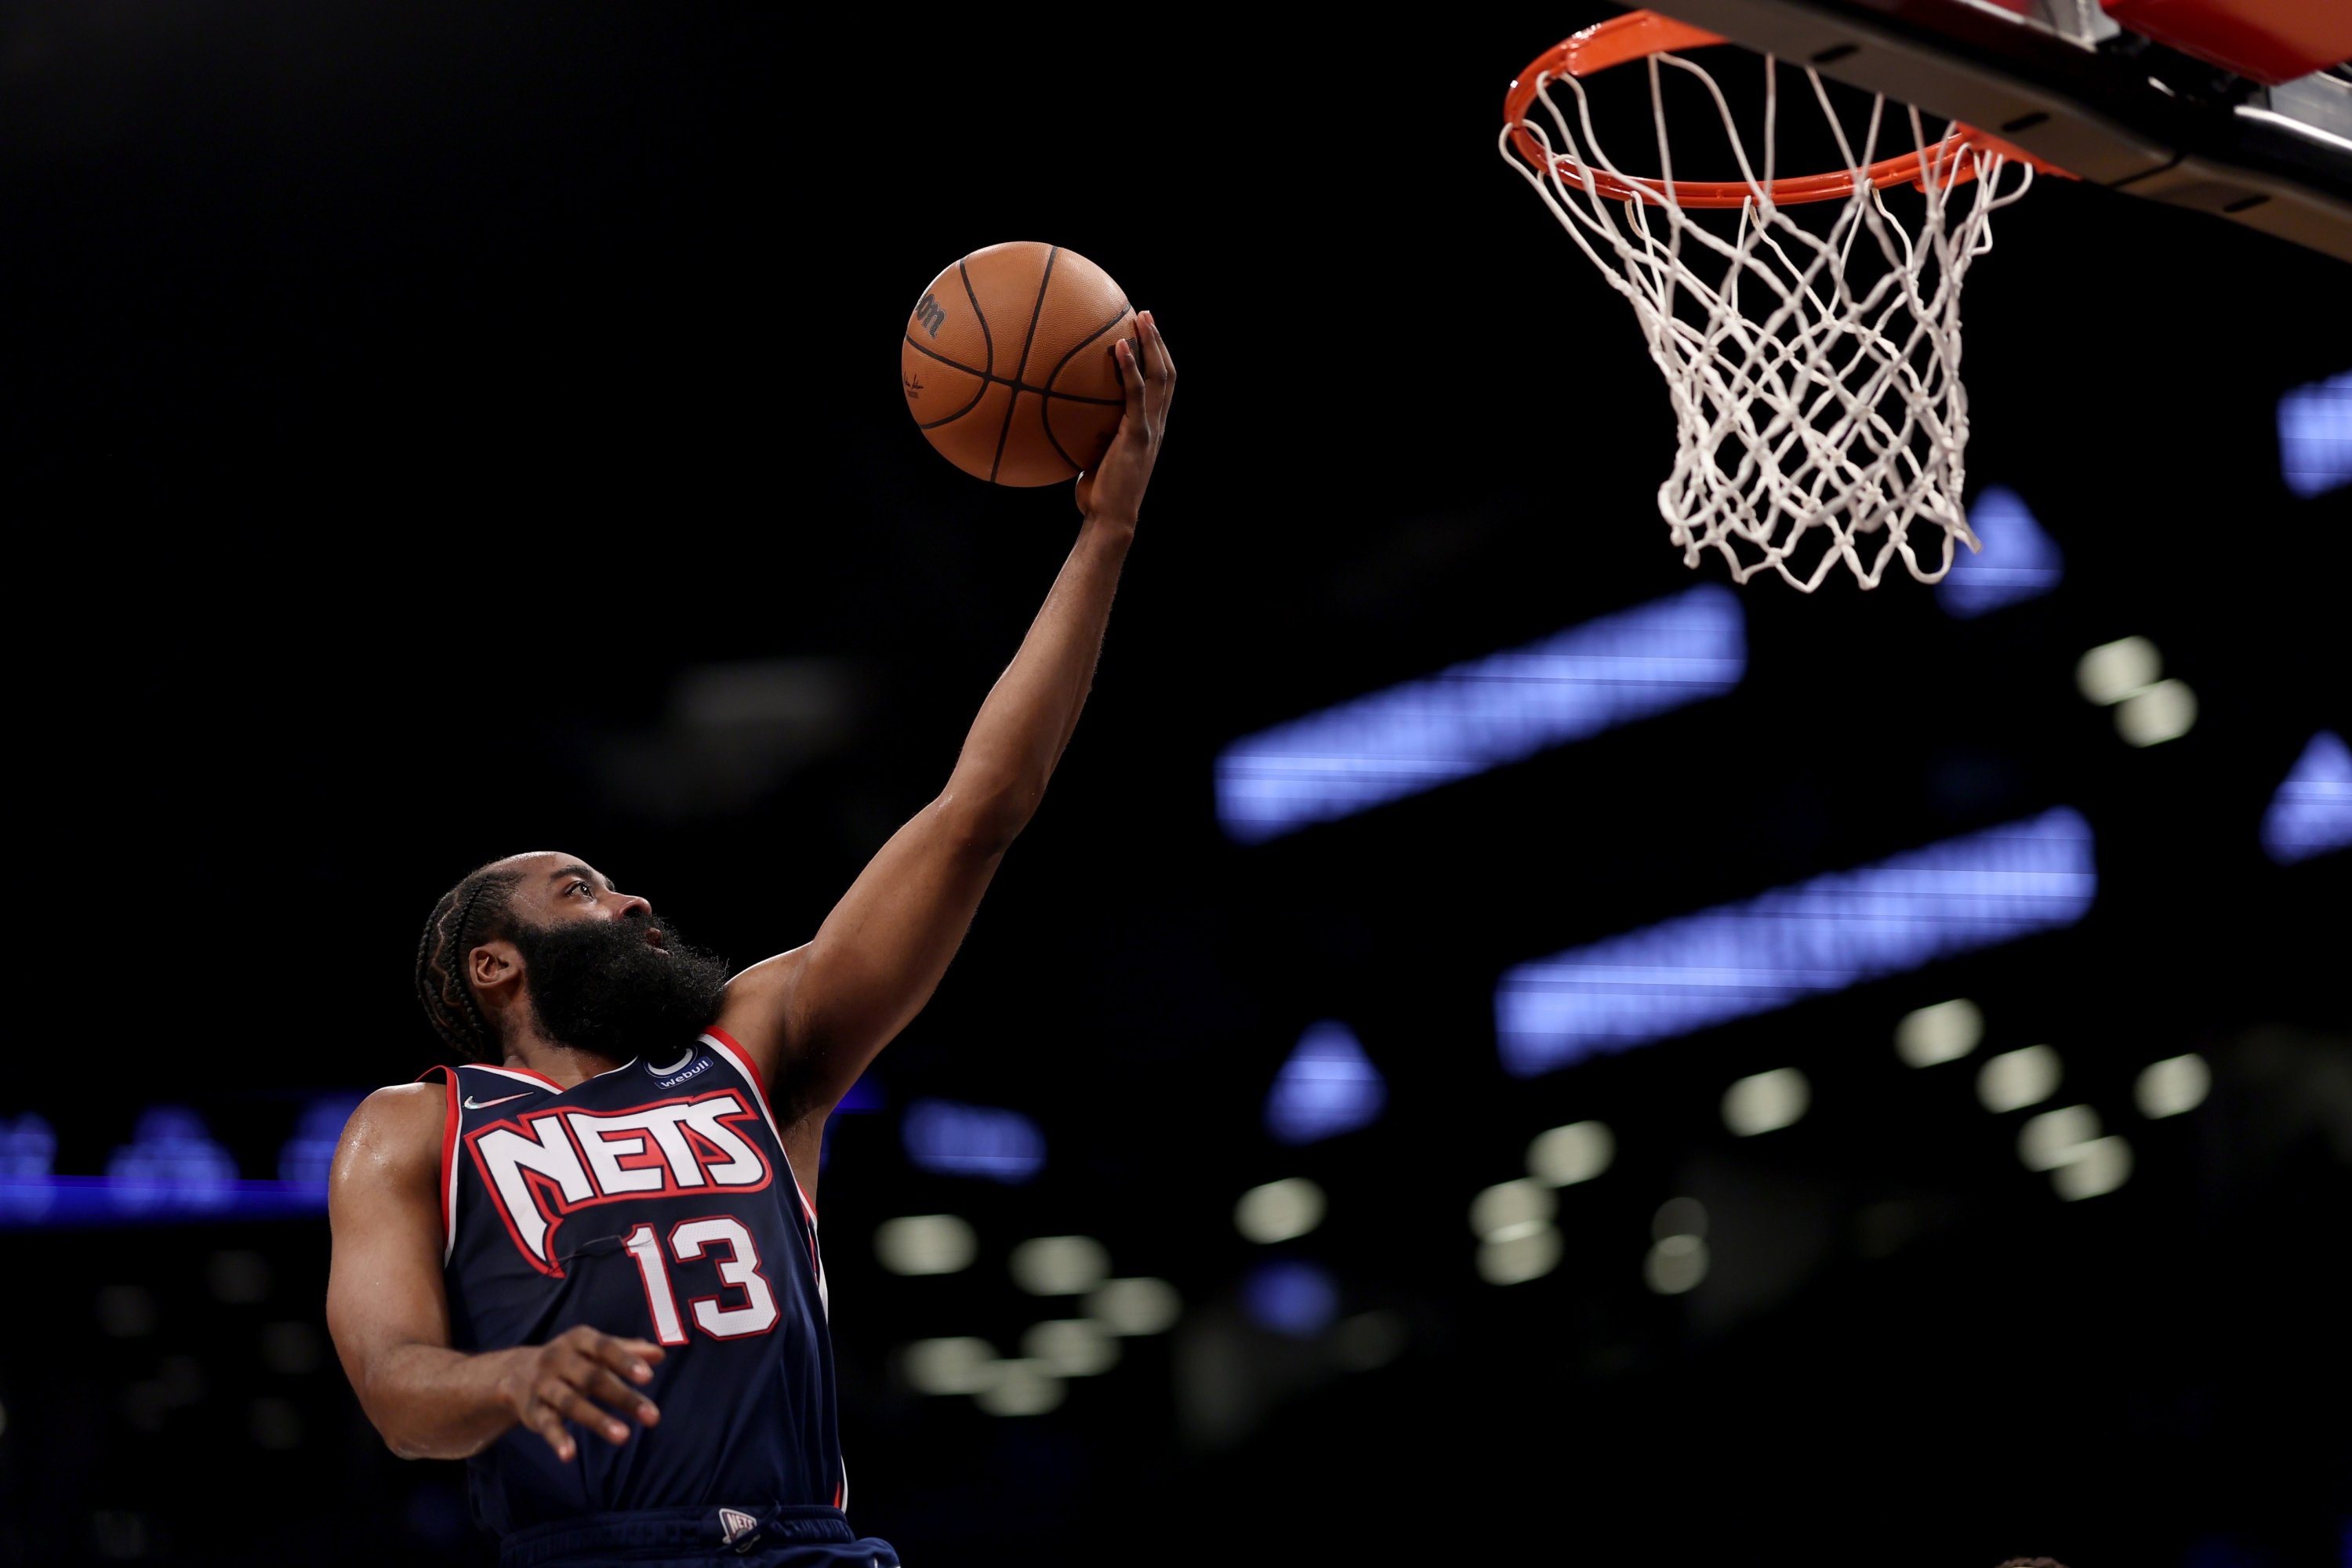 Brooklyn Nets' James Harden makes a layup during an NBA game against Los Angeles Clippers, New York City, U.S., Jan. 1, 2022. (AFP Photo)